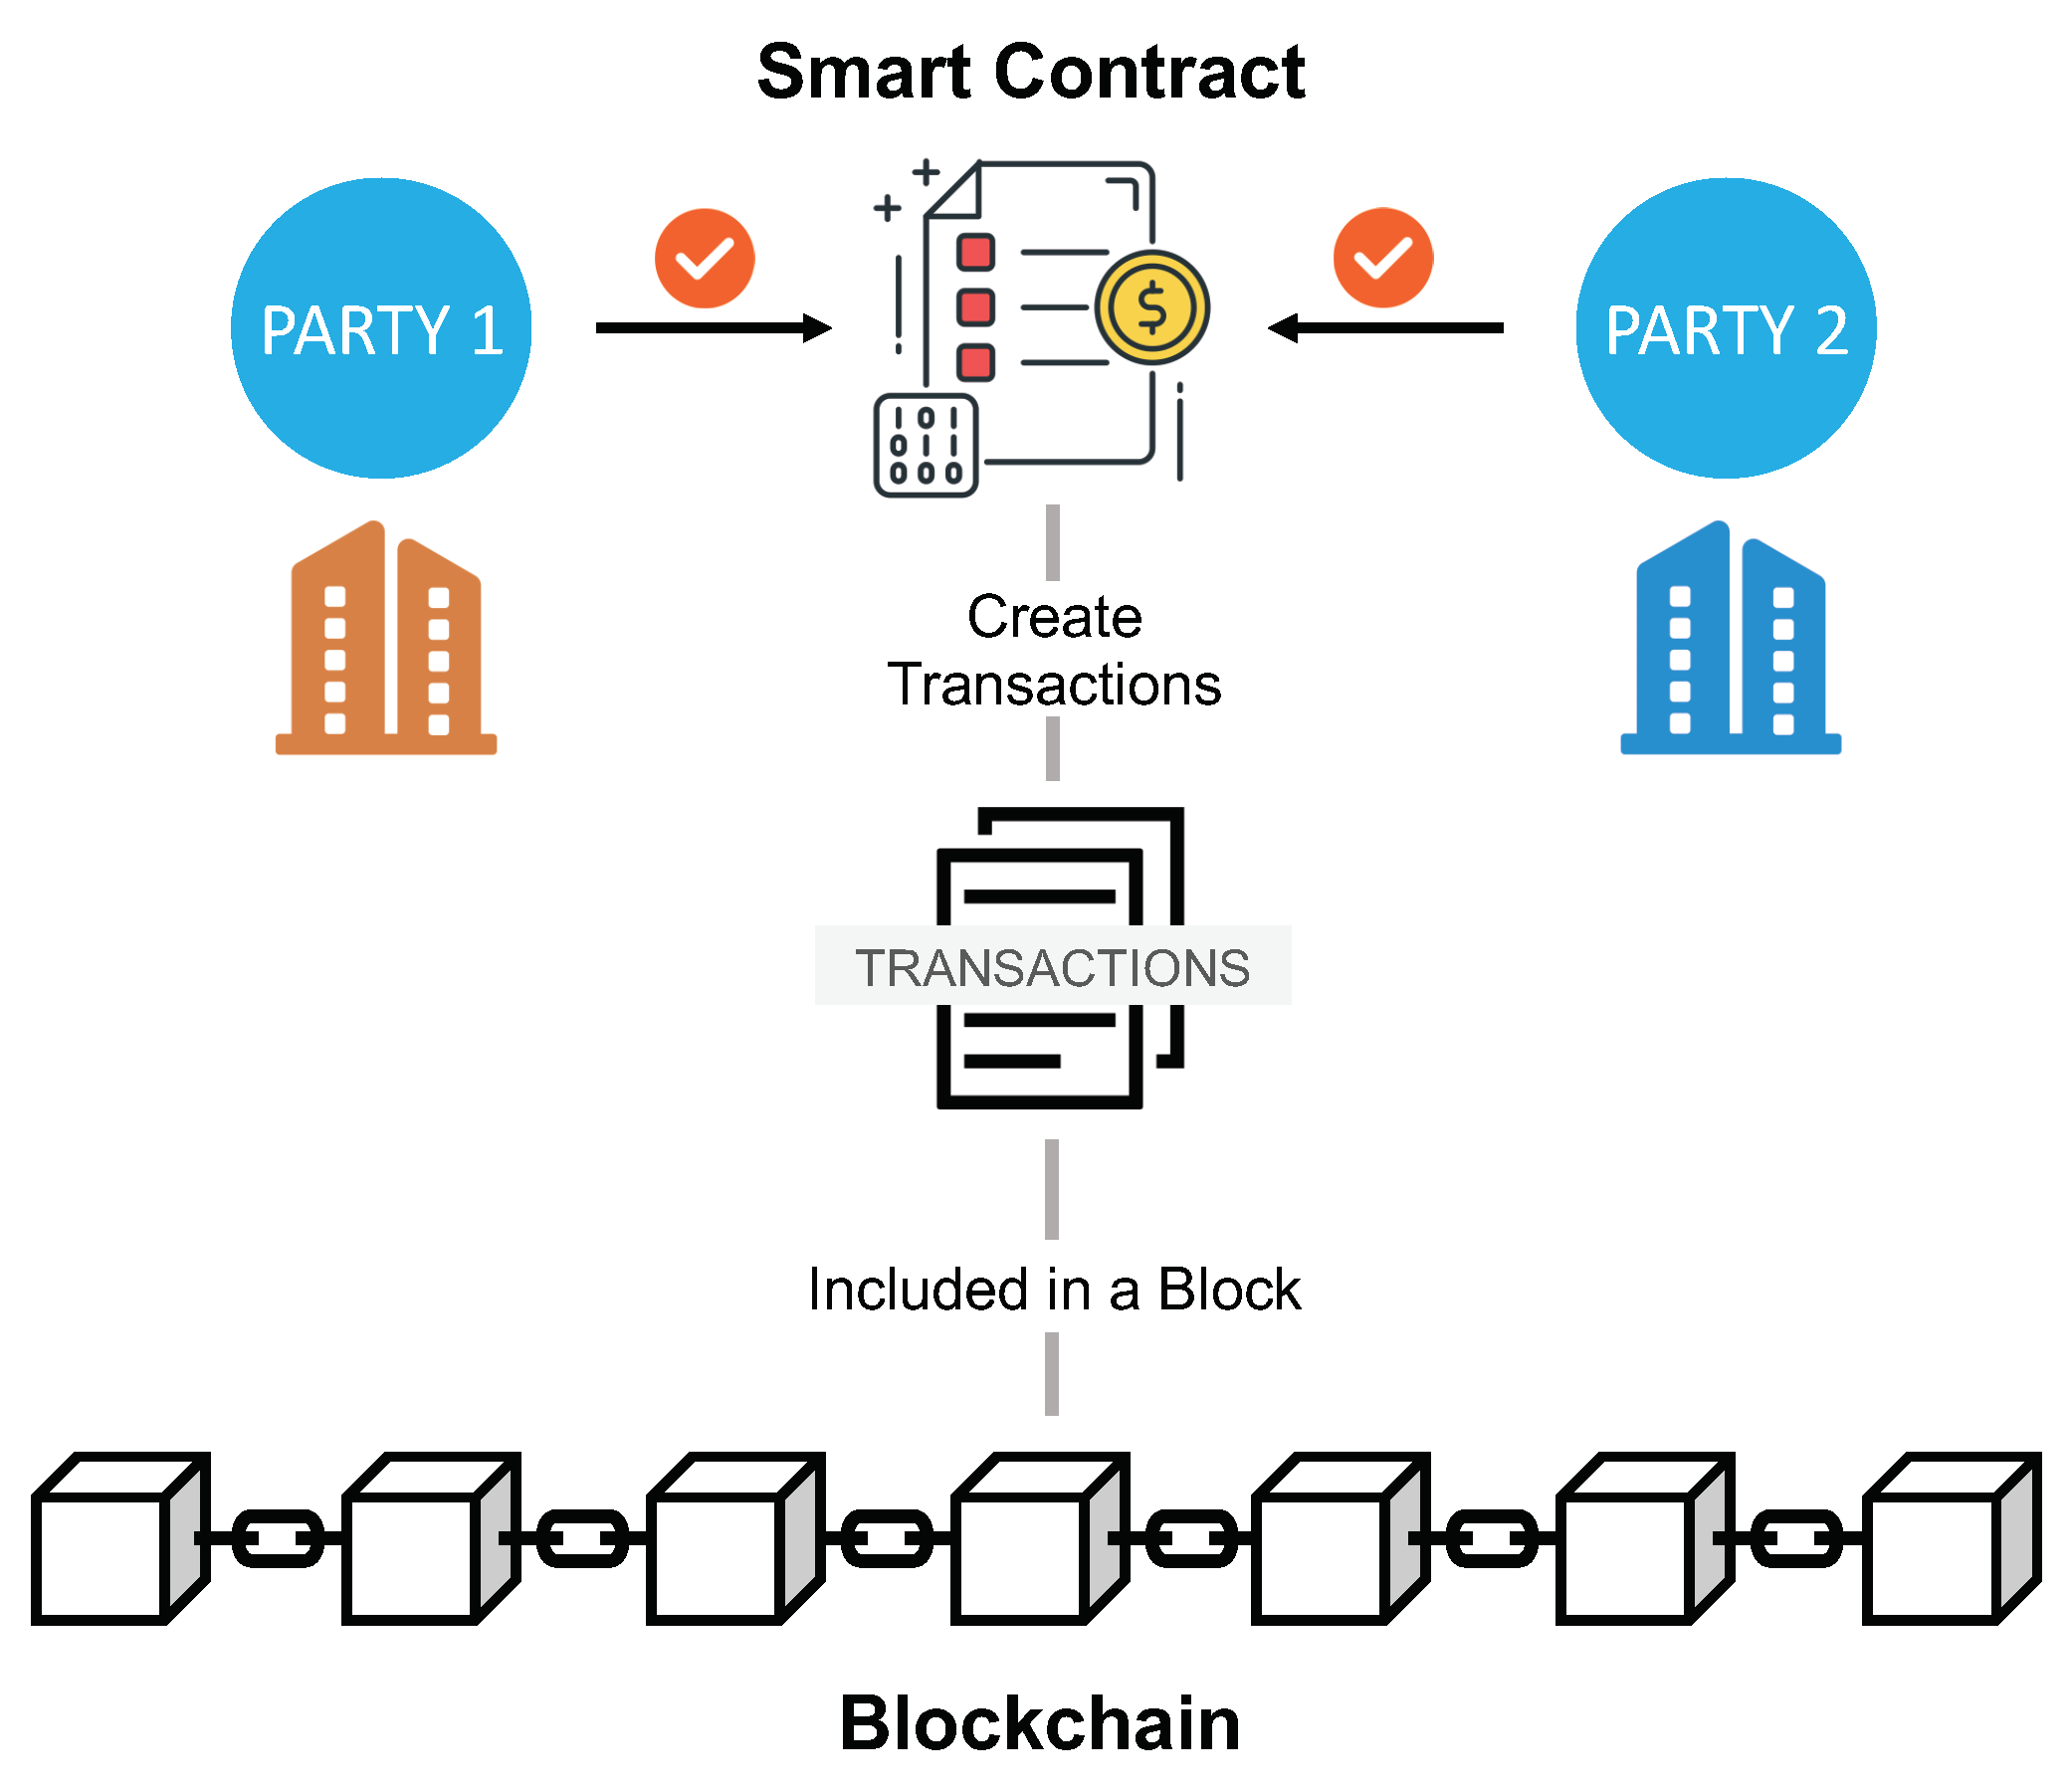 Smart Contract Security Tools: Slither